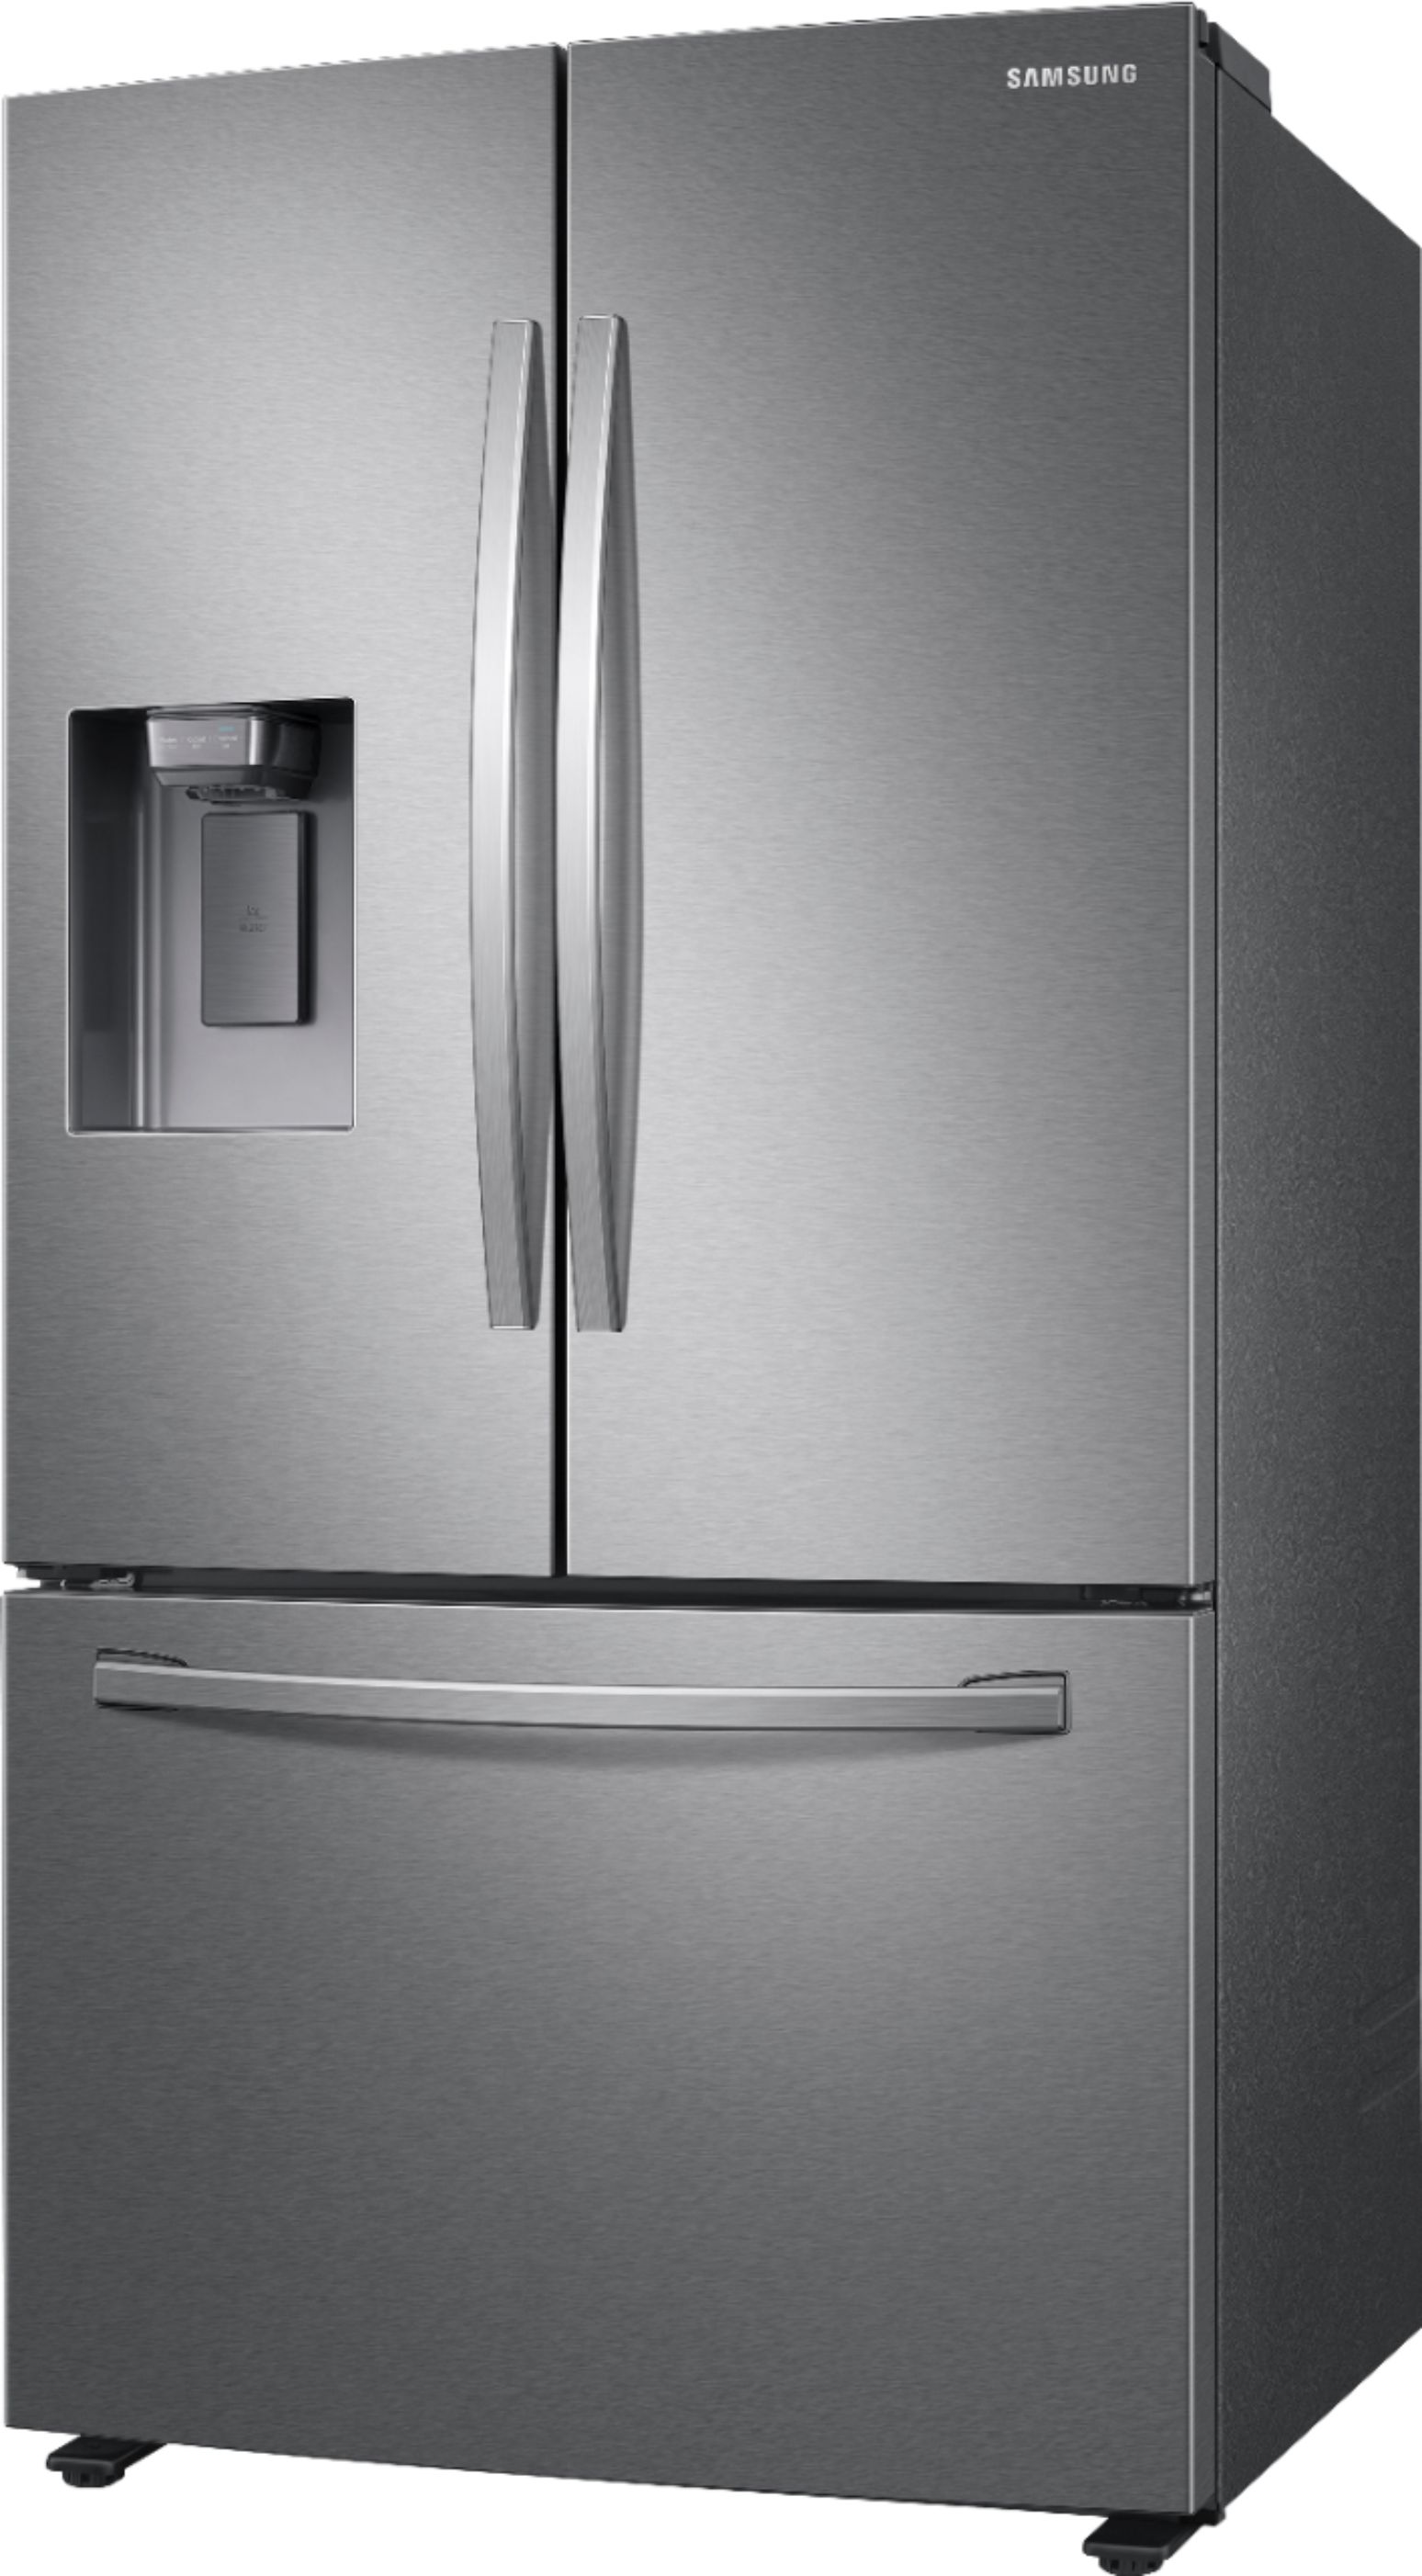 Angle View: Samsung - 27 cu. ft. 3-Door French Door Refrigerator with External Water & Ice Dispenser - Stainless Steel